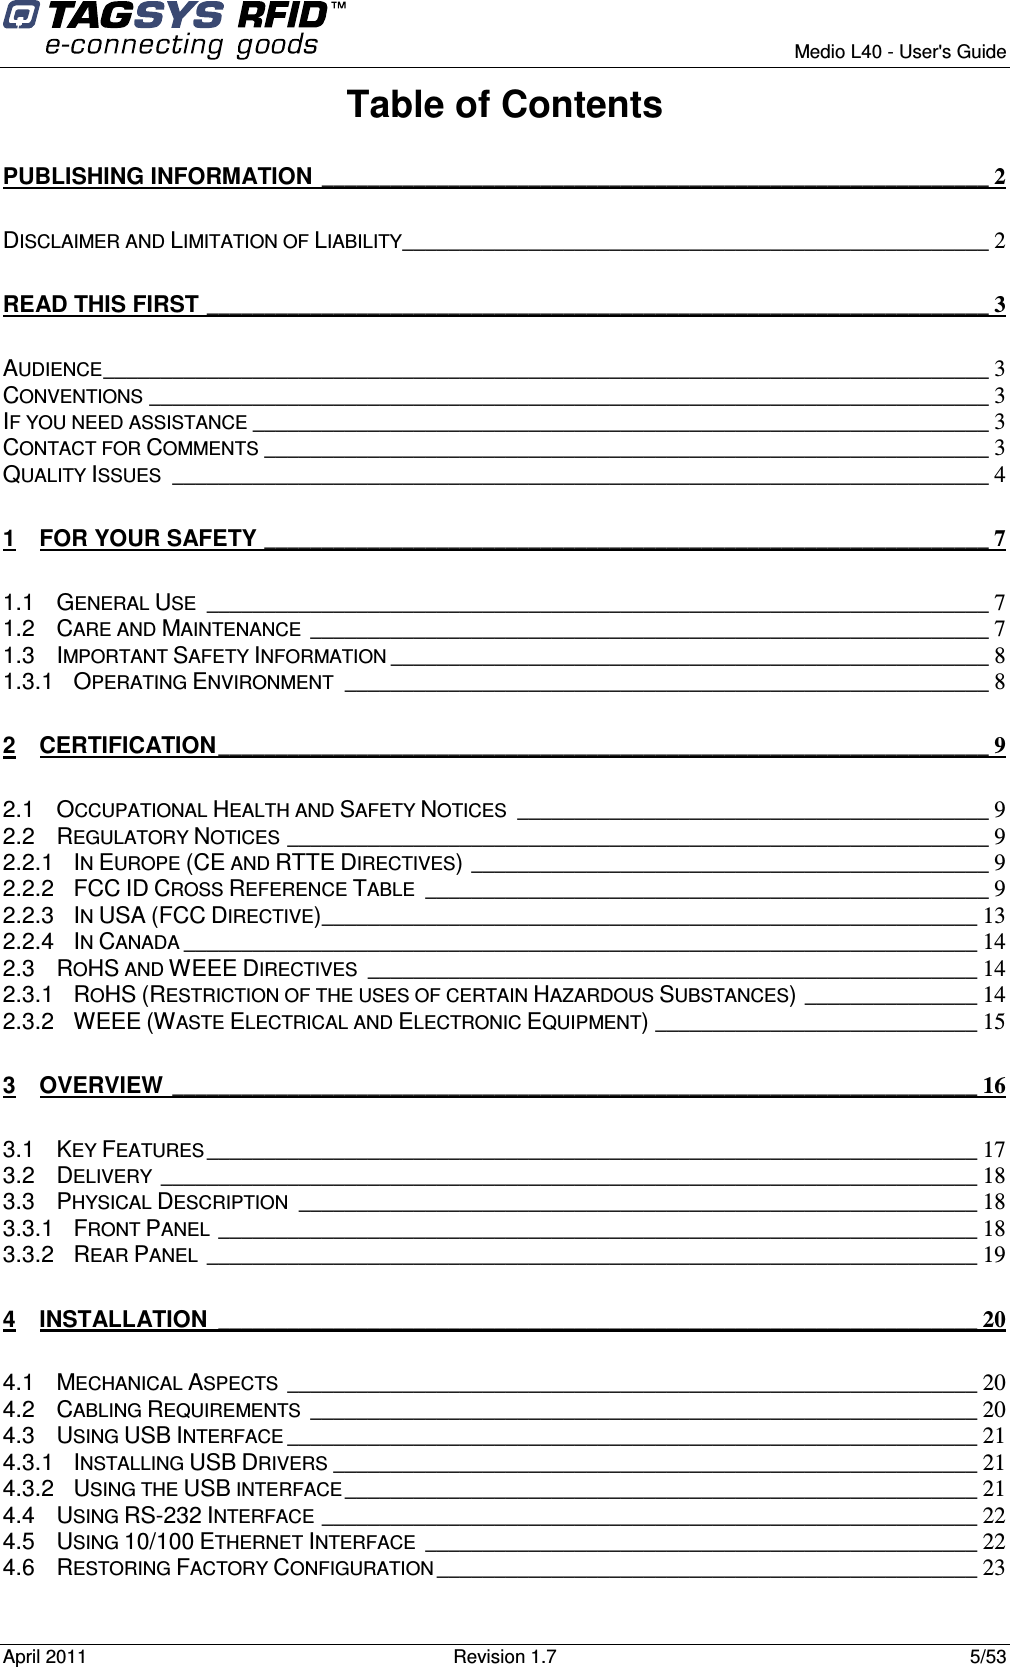        Medio L40 - User&apos;s Guide April 2011  Revision 1.7  5/53  Table of Contents PUBLISHING INFORMATION __________________________________________________________ 2 DISCLAIMER AND LIMITATION OF LIABILITY___________________________________________________ 2 READ THIS FIRST ____________________________________________________________________ 3 AUDIENCE_____________________________________________________________________________ 3 CONVENTIONS _________________________________________________________________________ 3 IF YOU NEED ASSISTANCE ________________________________________________________________ 3 CONTACT FOR COMMENTS _______________________________________________________________ 3 QUALITY ISSUES _______________________________________________________________________ 4 1 FOR YOUR SAFETY _______________________________________________________________ 7 1.1 GENERAL USE ____________________________________________________________________ 7 1.2 CARE AND MAINTENANCE ___________________________________________________________ 7 1.3 IMPORTANT SAFETY INFORMATION ____________________________________________________ 8 1.3.1 OPERATING ENVIRONMENT ________________________________________________________ 8 2 CERTIFICATION___________________________________________________________________ 9 2.1 OCCUPATIONAL HEALTH AND SAFETY NOTICES _________________________________________ 9 2.2 REGULATORY NOTICES _____________________________________________________________ 9 2.2.1 IN EUROPE (CE AND RTTE DIRECTIVES)_____________________________________________ 9 2.2.2 FCC ID CROSS REFERENCE TABLE _________________________________________________ 9 2.2.3 IN USA (FCC DIRECTIVE)_________________________________________________________ 13 2.2.4 IN CANADA _____________________________________________________________________ 14 2.3 ROHS AND WEEE DIRECTIVES _____________________________________________________ 14 2.3.1 ROHS (RESTRICTION OF THE USES OF CERTAIN HAZARDOUS SUBSTANCES)_______________ 14 2.3.2 WEEE (WASTE ELECTRICAL AND ELECTRONIC EQUIPMENT)____________________________ 15 3 OVERVIEW ______________________________________________________________________ 16 3.1 KEY FEATURES___________________________________________________________________ 17 3.2 DELIVERY _______________________________________________________________________ 18 3.3 PHYSICAL DESCRIPTION ___________________________________________________________ 18 3.3.1 FRONT PANEL __________________________________________________________________ 18 3.3.2 REAR PANEL ___________________________________________________________________ 19 4 INSTALLATION __________________________________________________________________ 20 4.1 MECHANICAL ASPECTS ____________________________________________________________ 20 4.2 CABLING REQUIREMENTS __________________________________________________________ 20 4.3 USING USB INTERFACE ____________________________________________________________ 21 4.3.1 INSTALLING USB DRIVERS ________________________________________________________ 21 4.3.2 USING THE USB INTERFACE_______________________________________________________ 21 4.4 USING RS-232 INTERFACE _________________________________________________________ 22 4.5 USING 10/100 ETHERNET INTERFACE ________________________________________________ 22 4.6 RESTORING FACTORY CONFIGURATION _______________________________________________ 23 